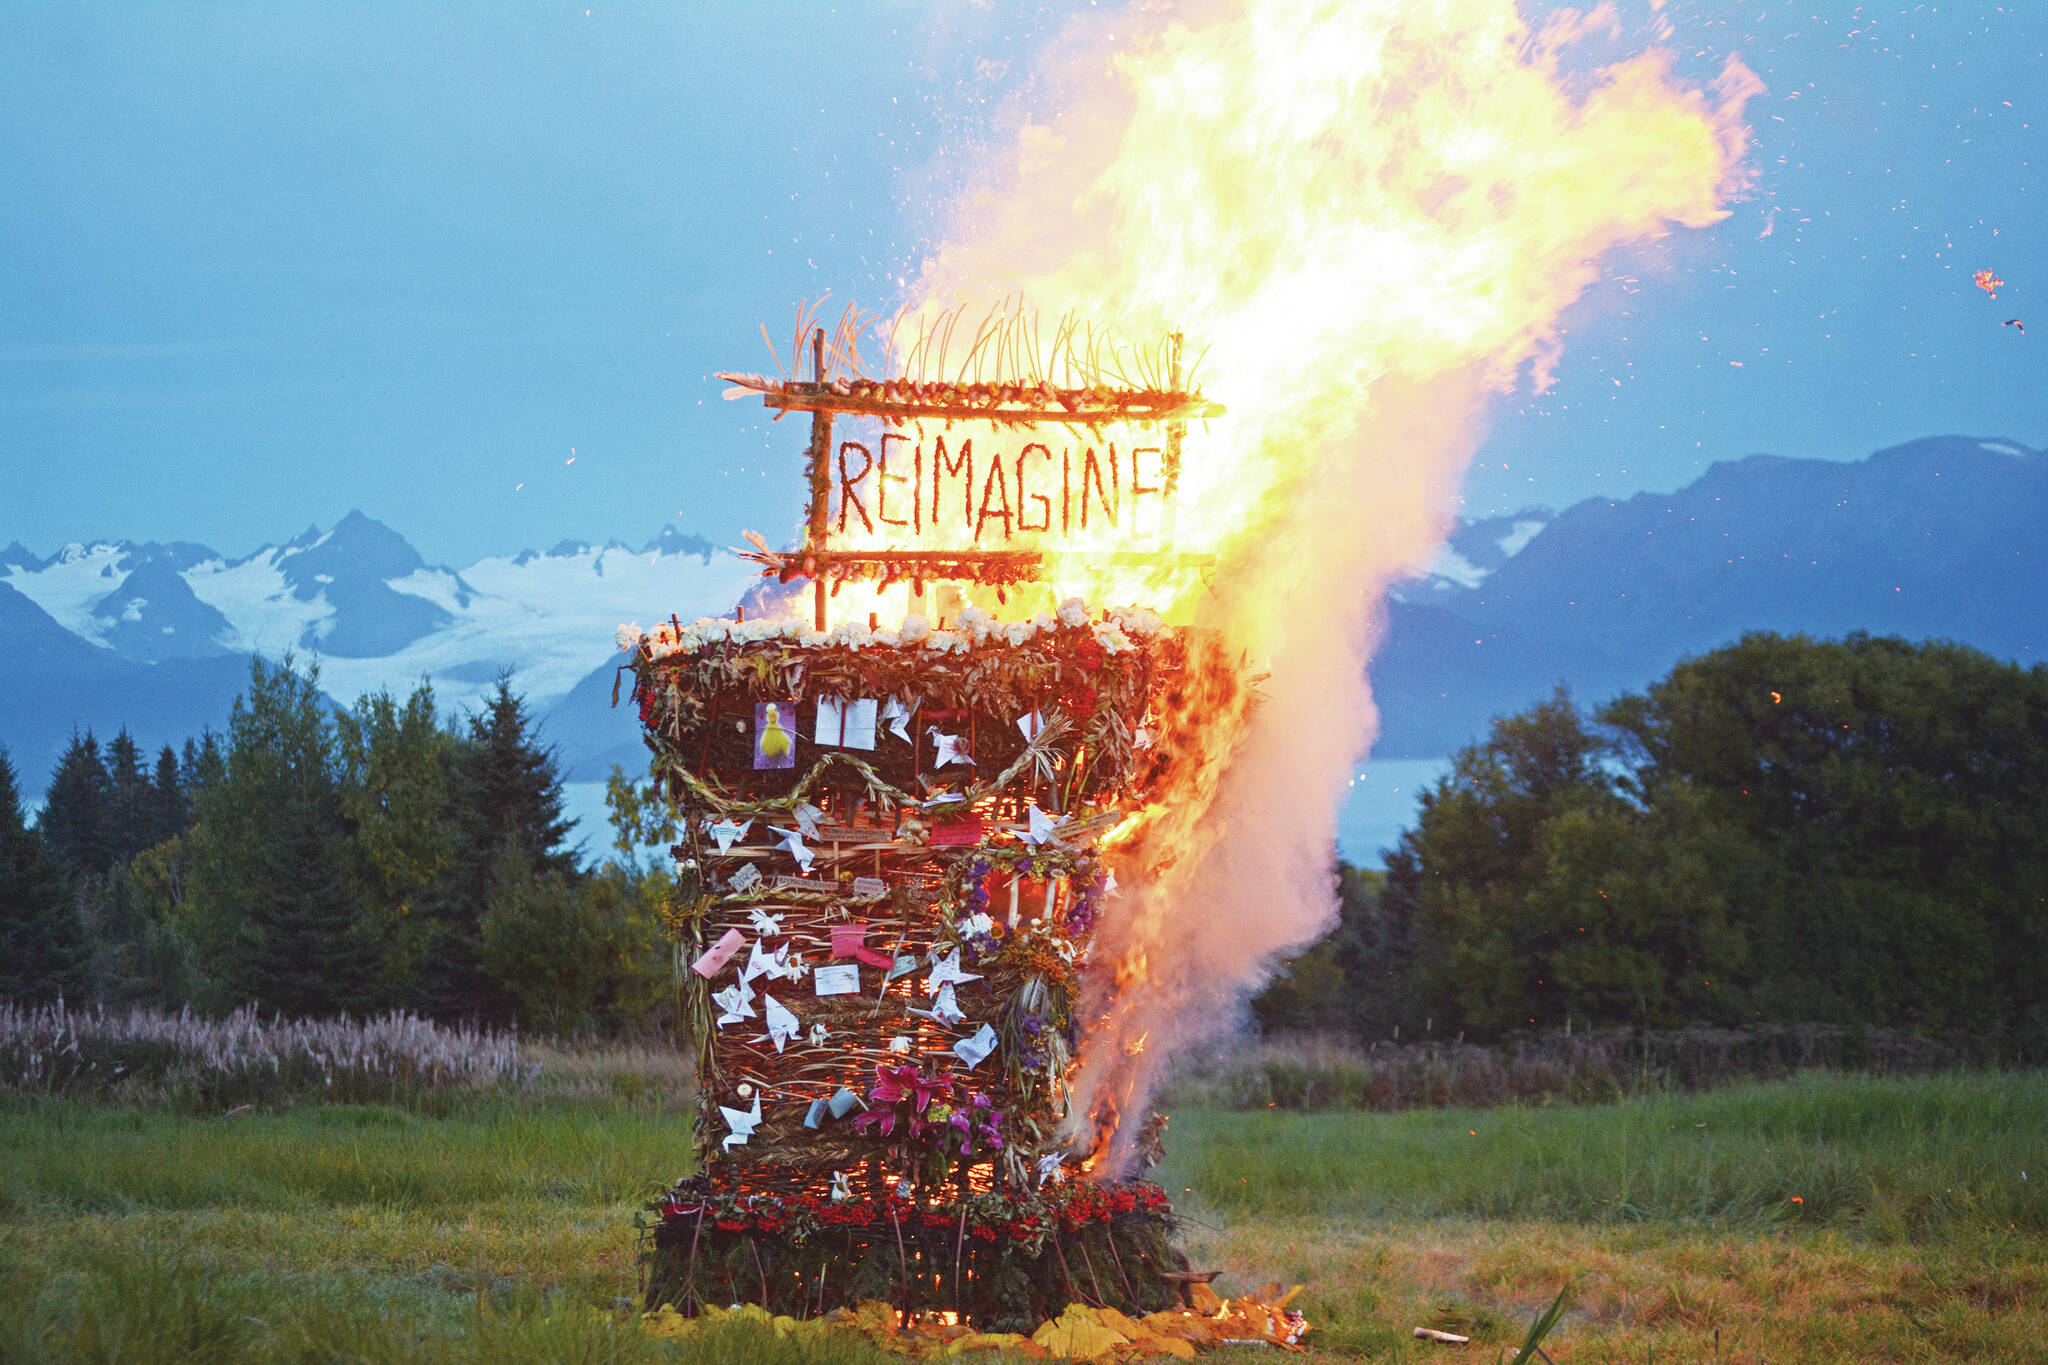 “Reimagine,” the 17th annual Burning Basket, catches fire in a field on Sunday, Sept. 13, 2020, near Homer. Artist Mavis Muller intended to broadcast live on Facebook and YouTube the burning of the basket, but because of technical difficulties that didn’t happen. (Photo by Michael Armstrong/Homer News)